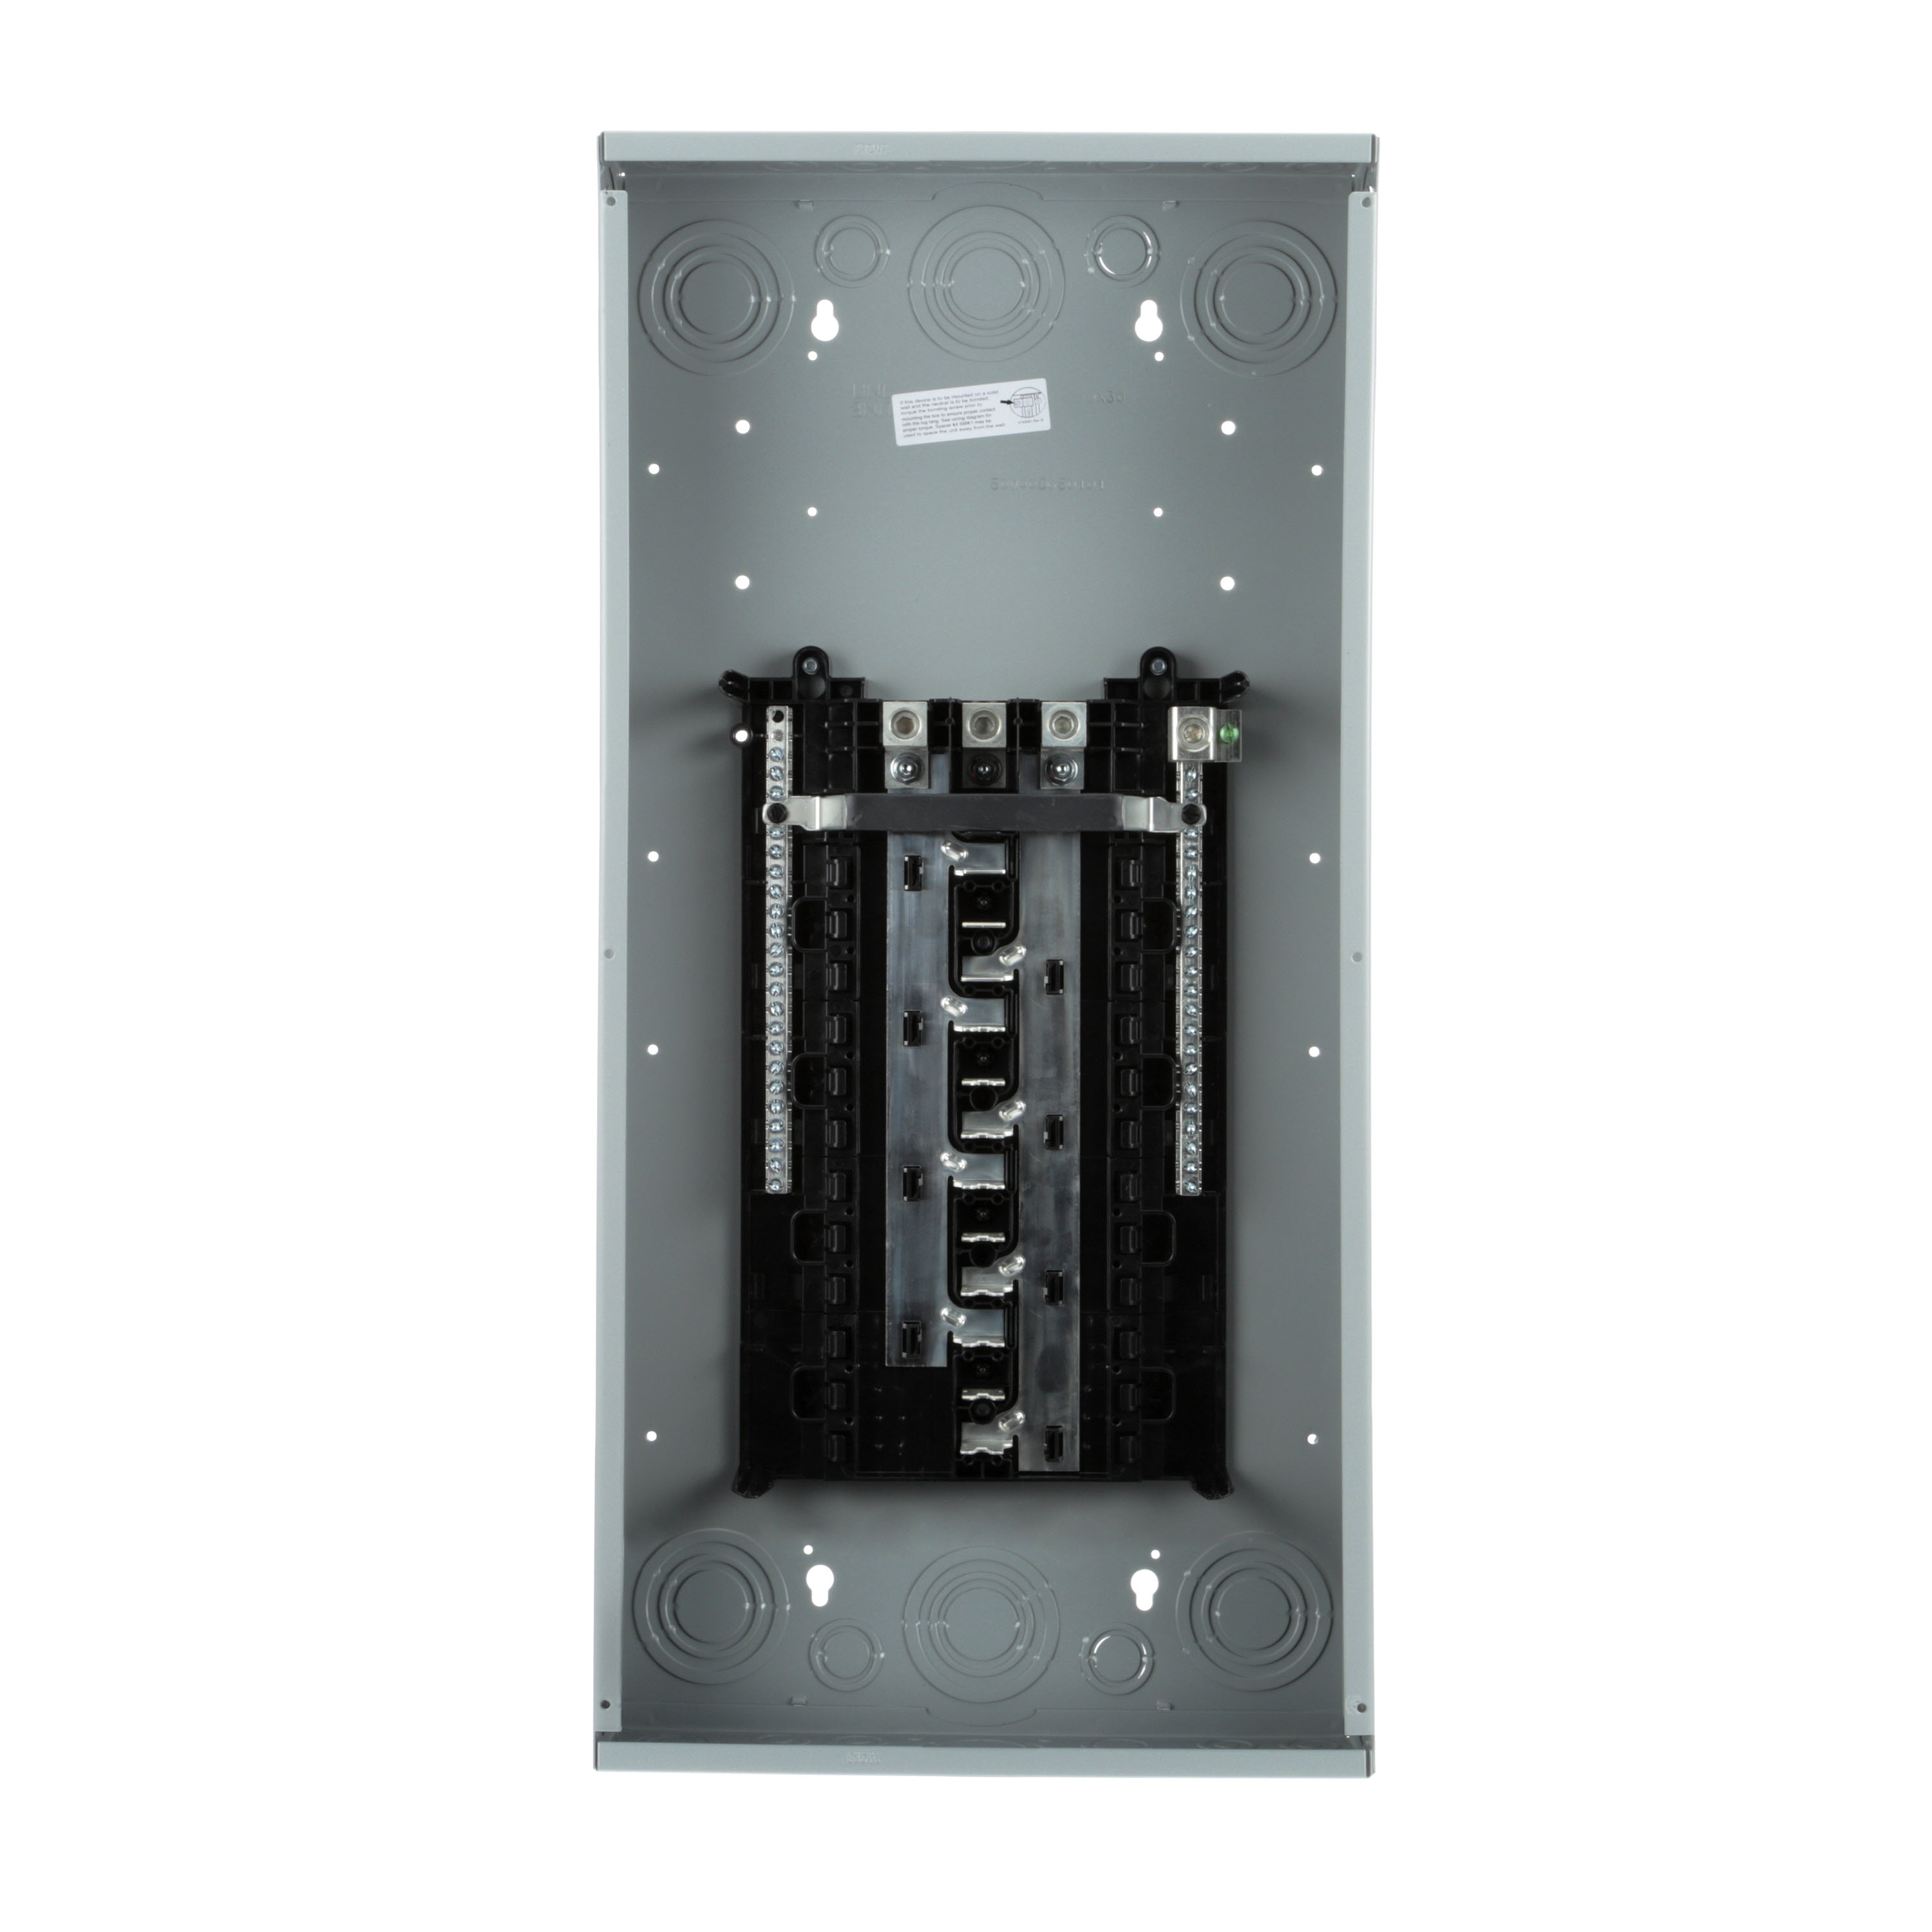 SIEMENS LOW VOLTAGE ES SERIES LOAD CENTER. MAIN LUG WITH 24 1-INCH SPACES ALLOWING MAX 42 CIRCUITS. 3-PHASE 4-WIRE SYSTEM RATED 120/240V OR 120/208V (150A) 100KA INTERRUPT. SPECIAL FEATURES ALUMINUM BUS, GRAY TRIM, NEMA TYPE1 ENCLOSURE FORINDOOR USE.